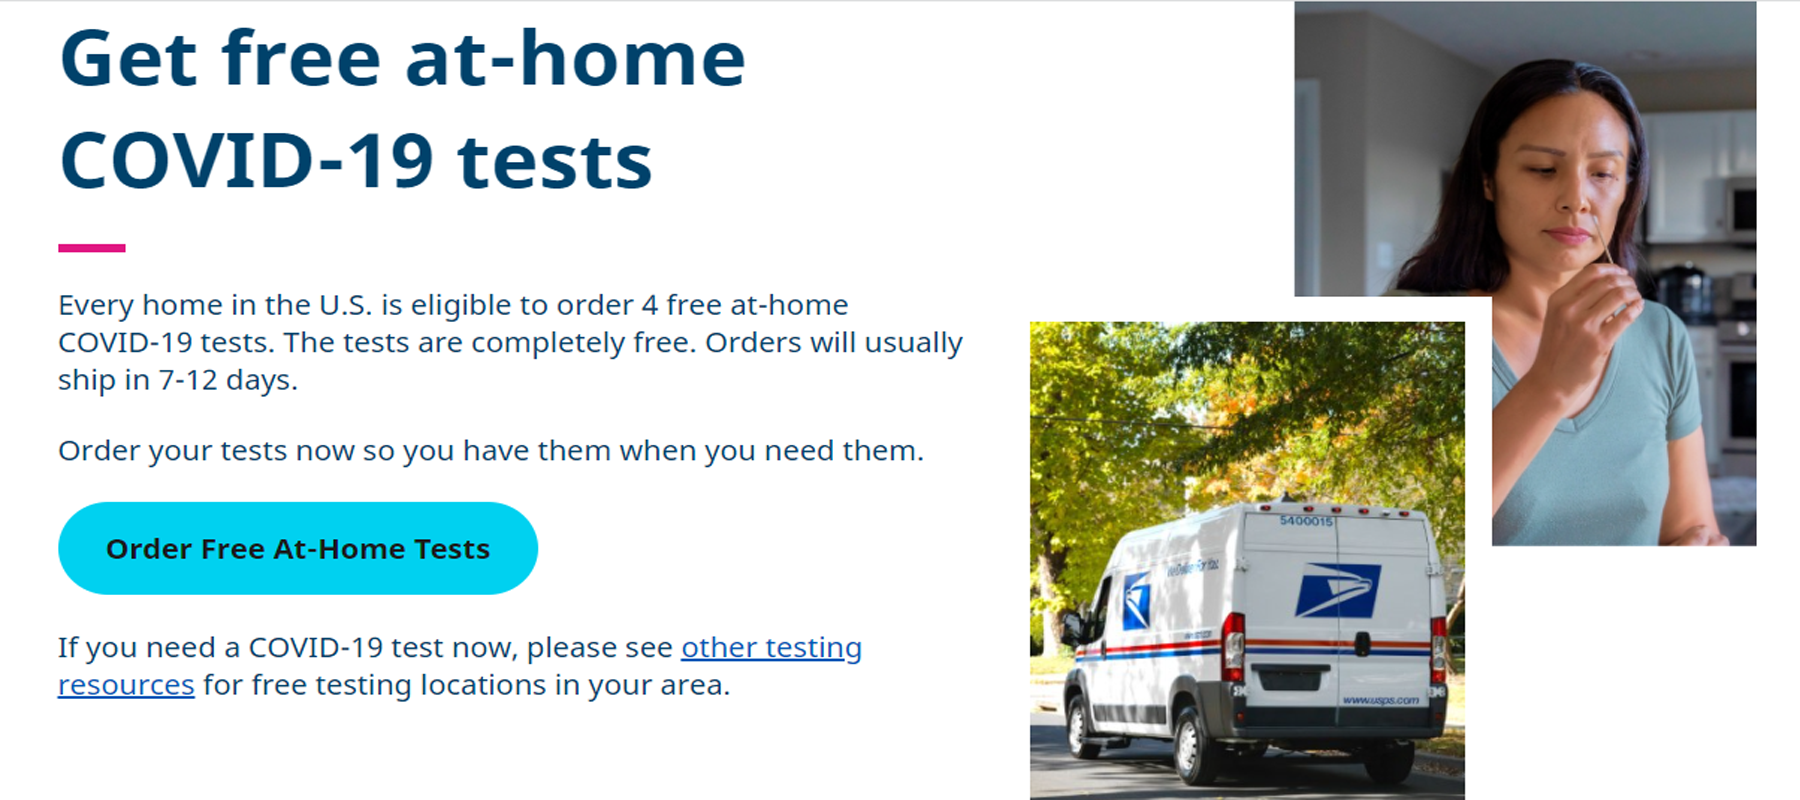 Get-free-at-home-COVID-19-tests.PNG